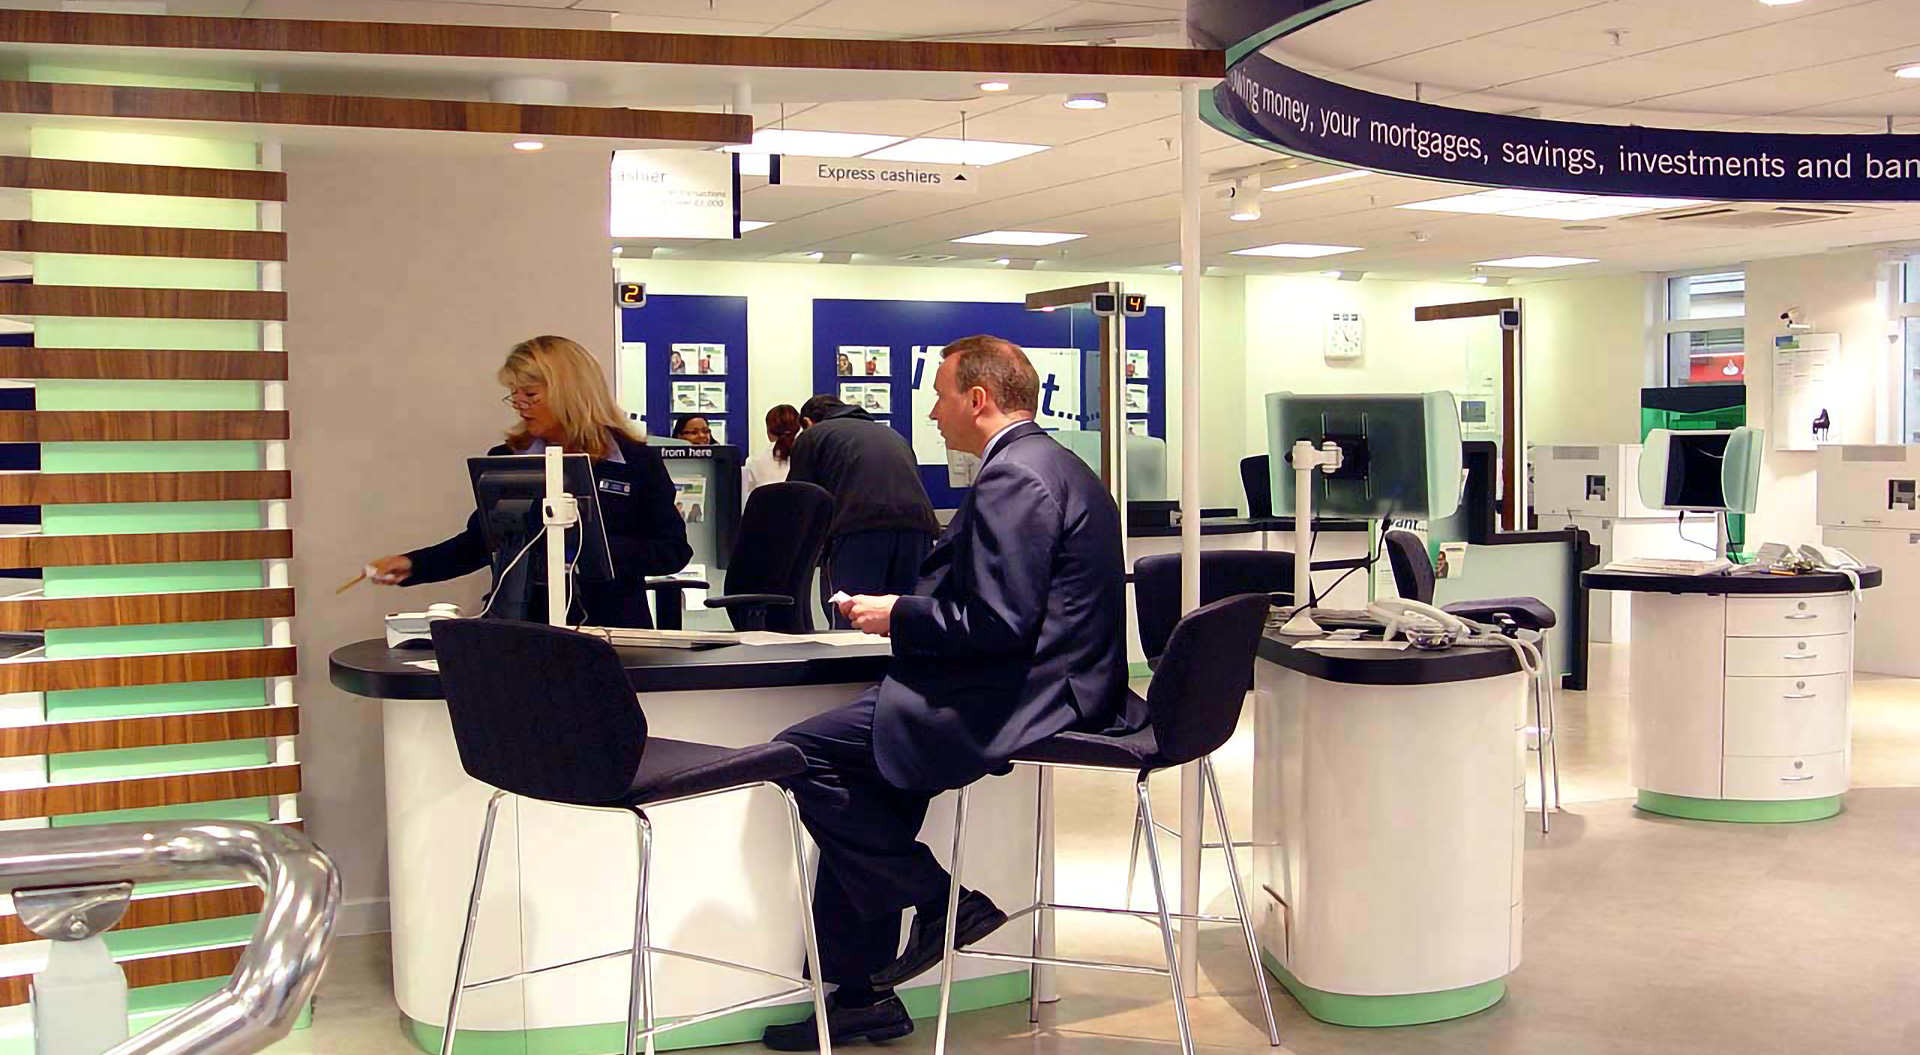 Lloyds Bank, Personal Banking and consultation point